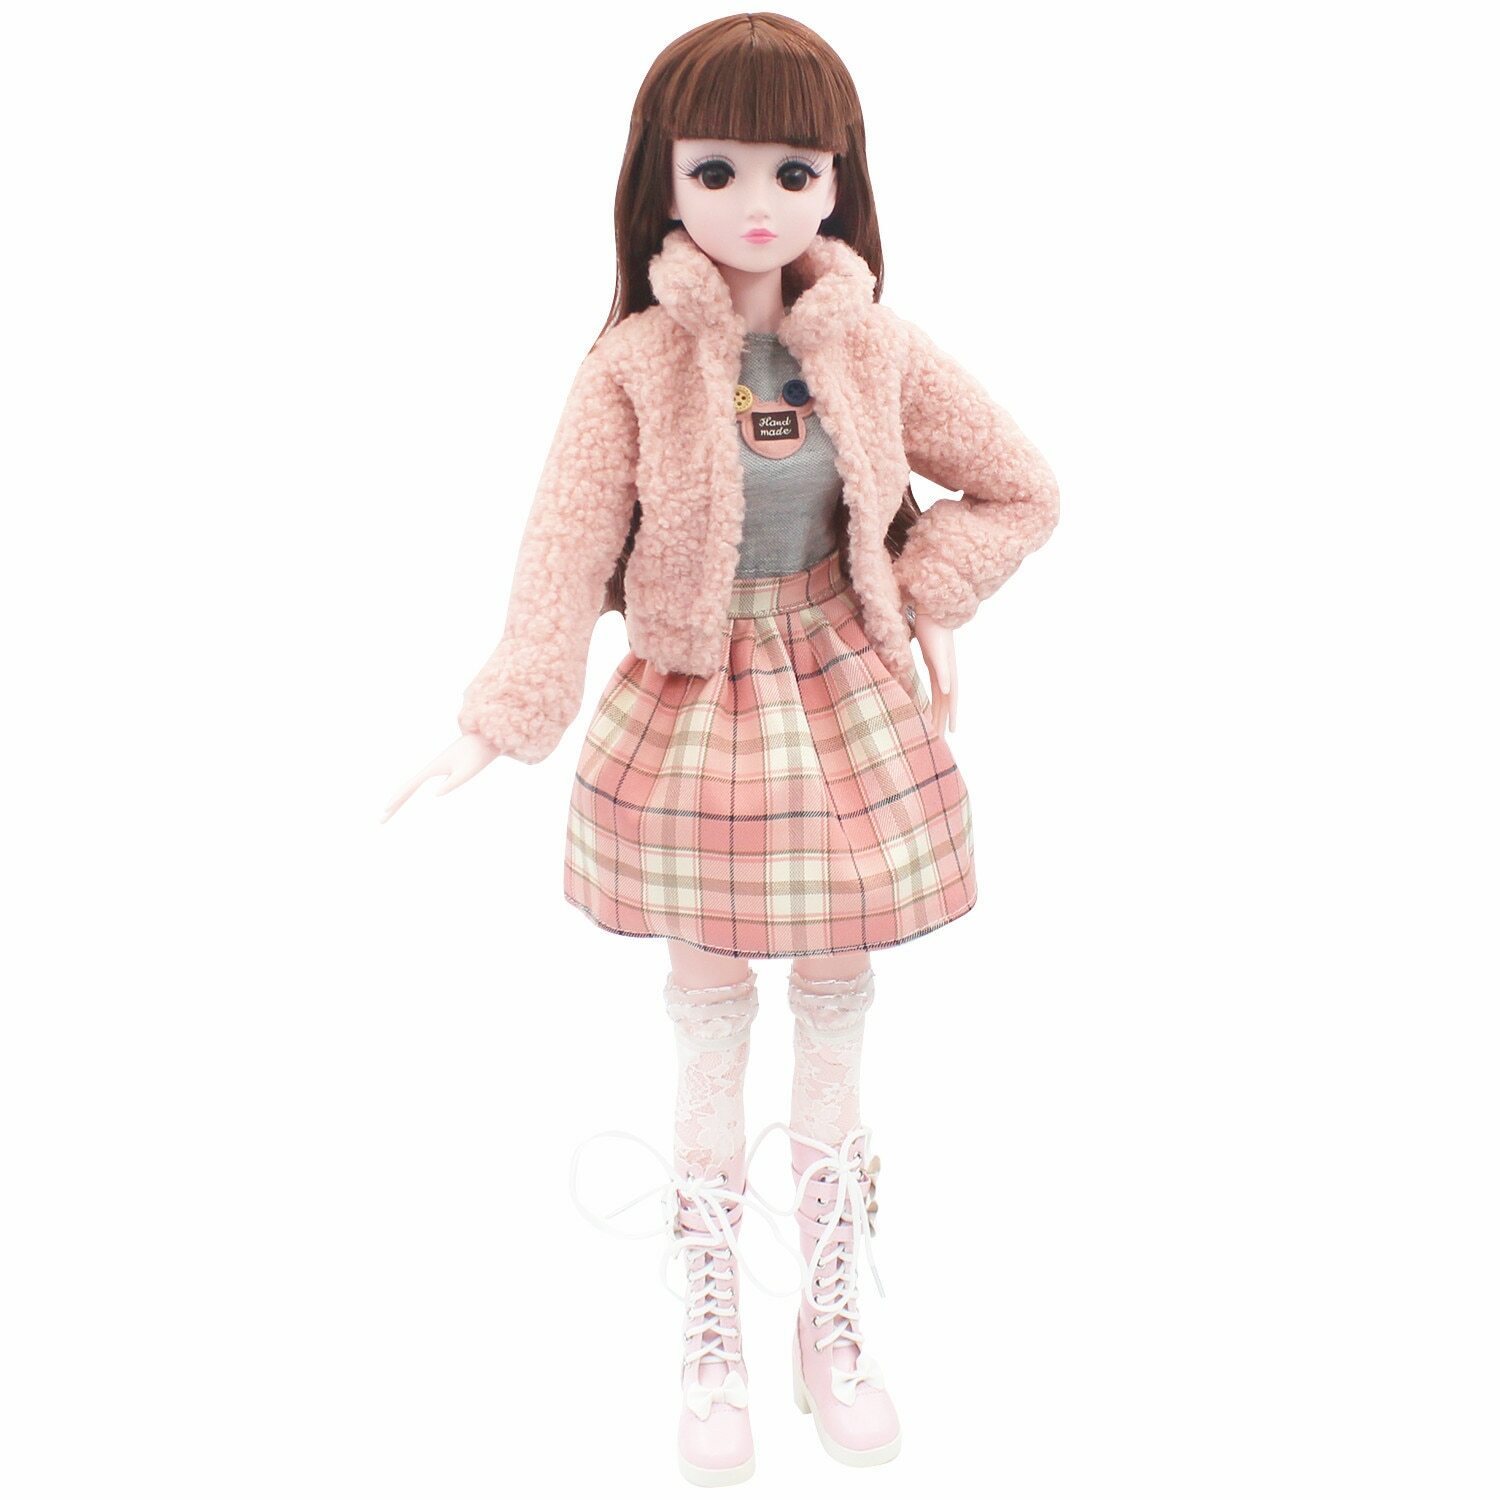 Themes And Characters Charming Lolita Doll Set: Collectible, Vintage-Style Playtime Companions